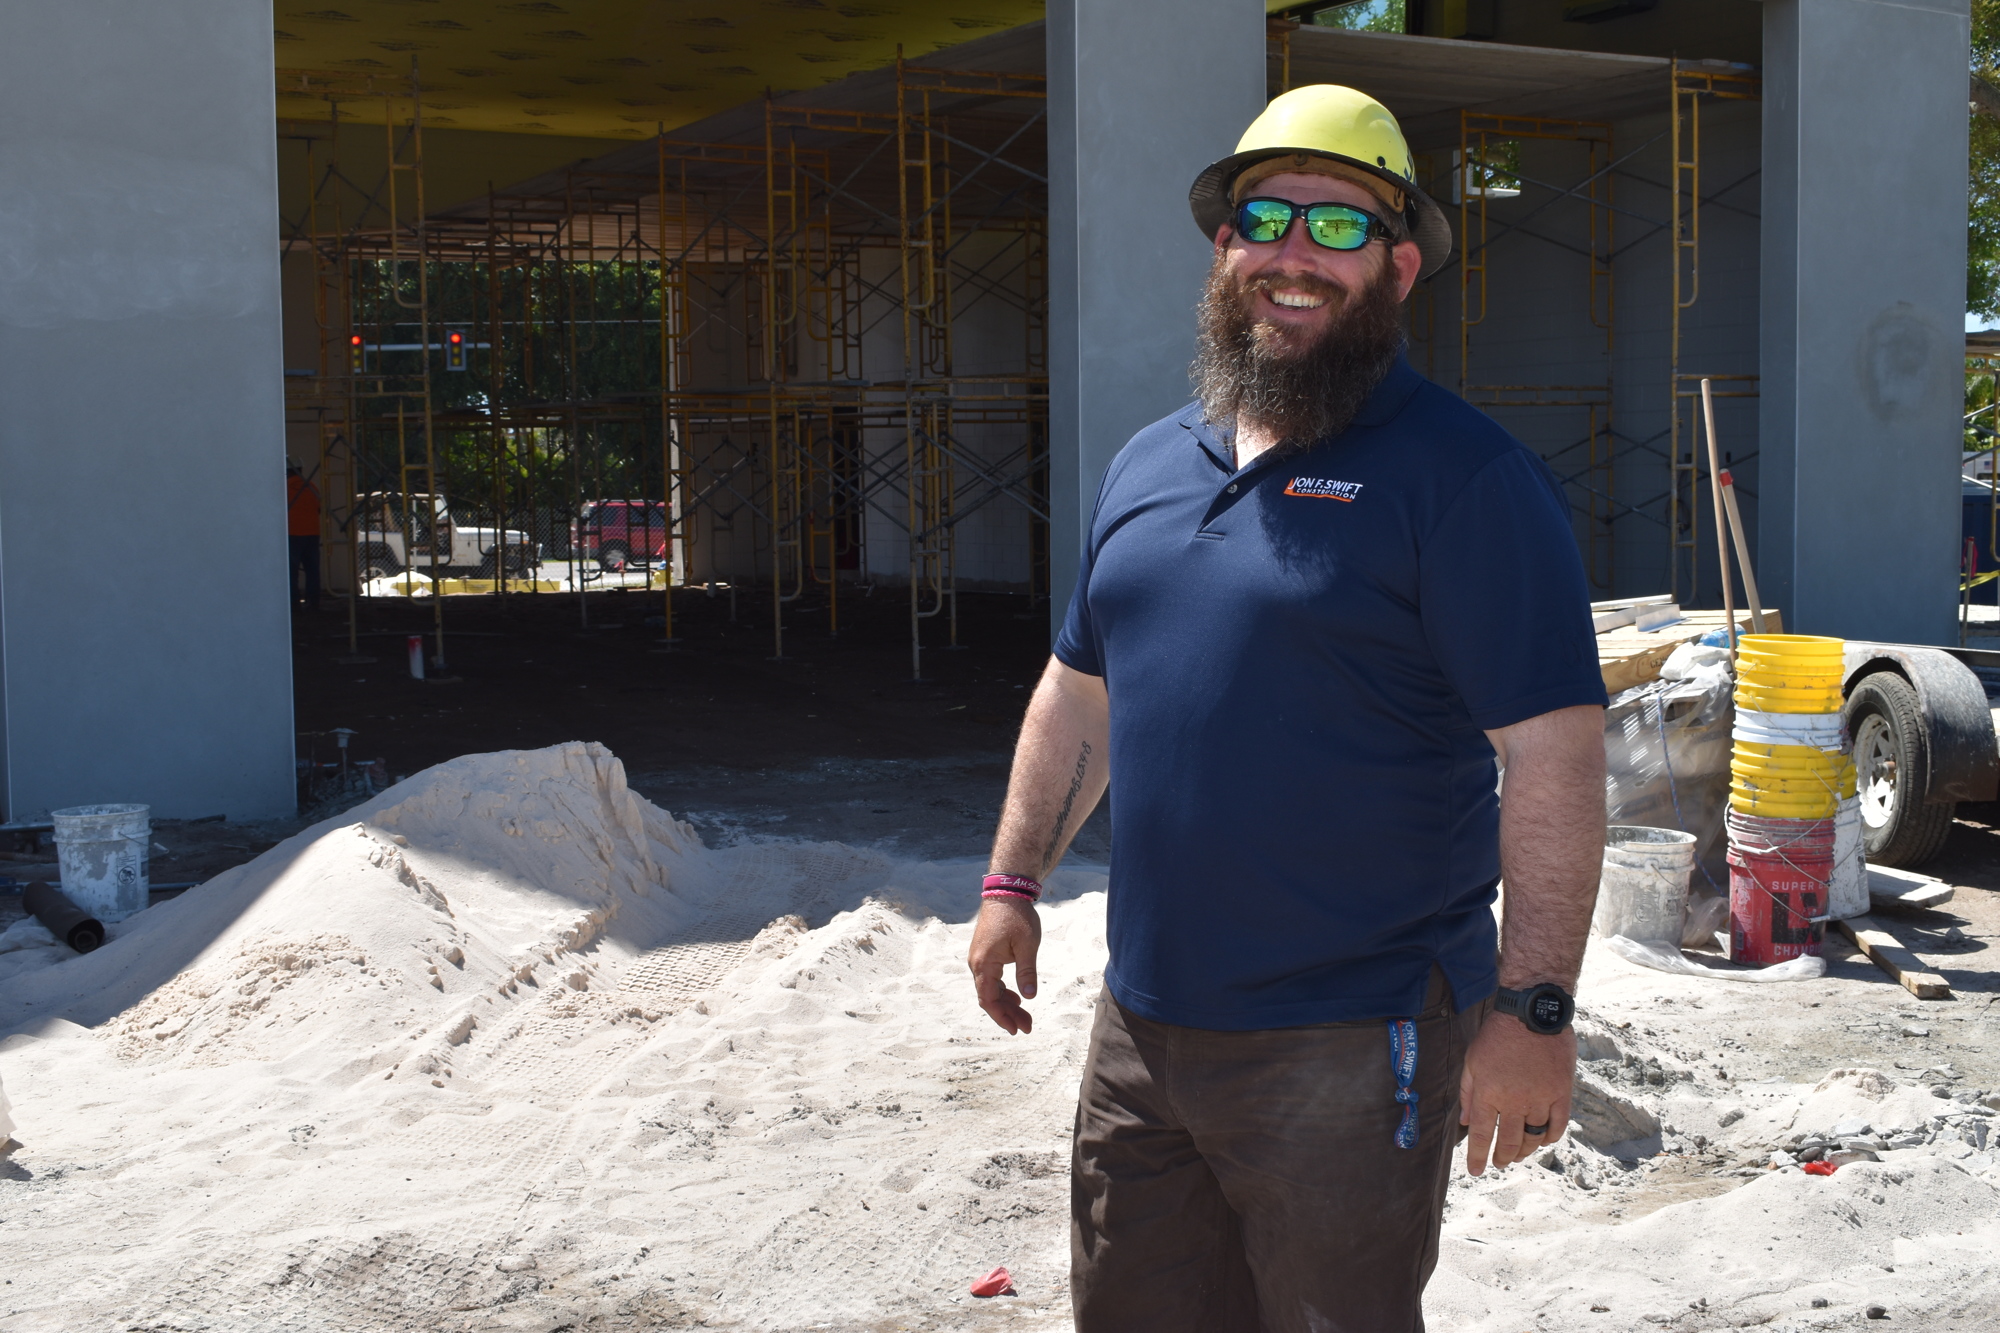 Jon F. Swift Construction superintendent Shane Hamm is responsible for overseeing the construction of Fire Station 92.